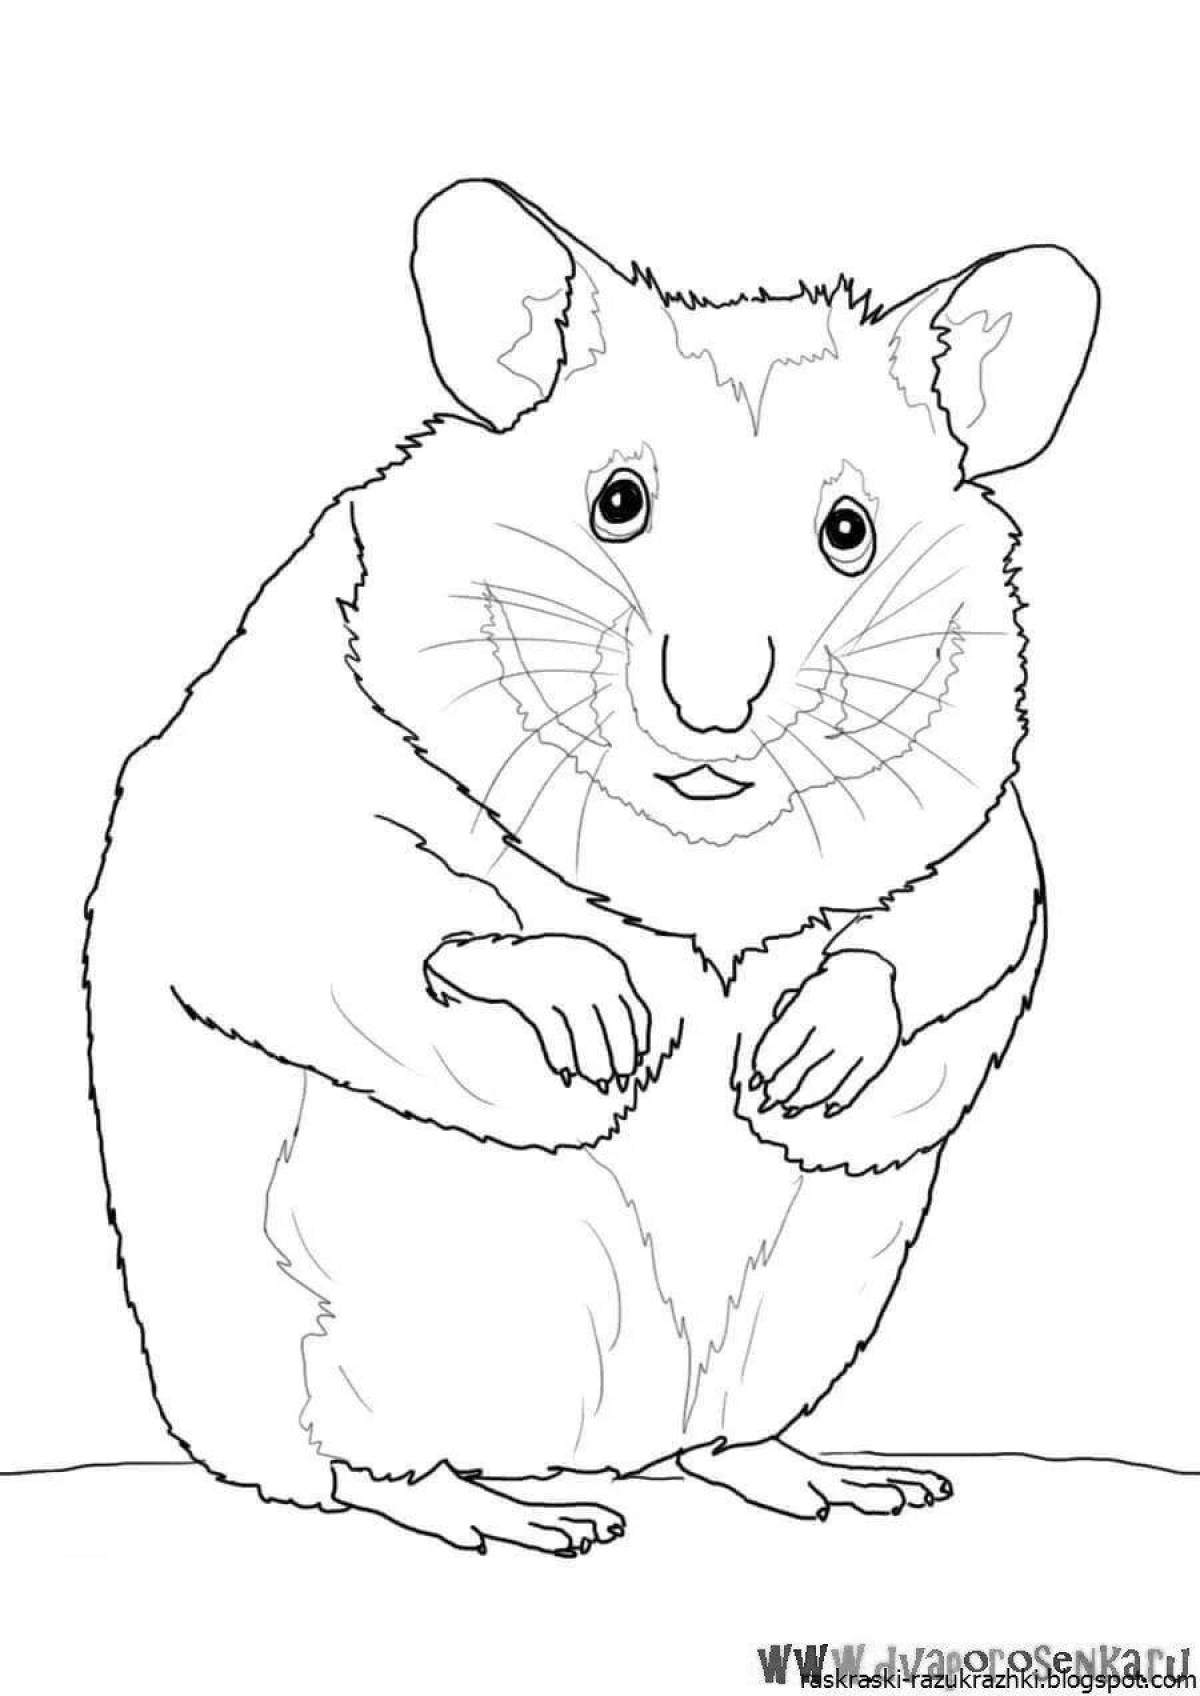 Adorable hamster coloring pages